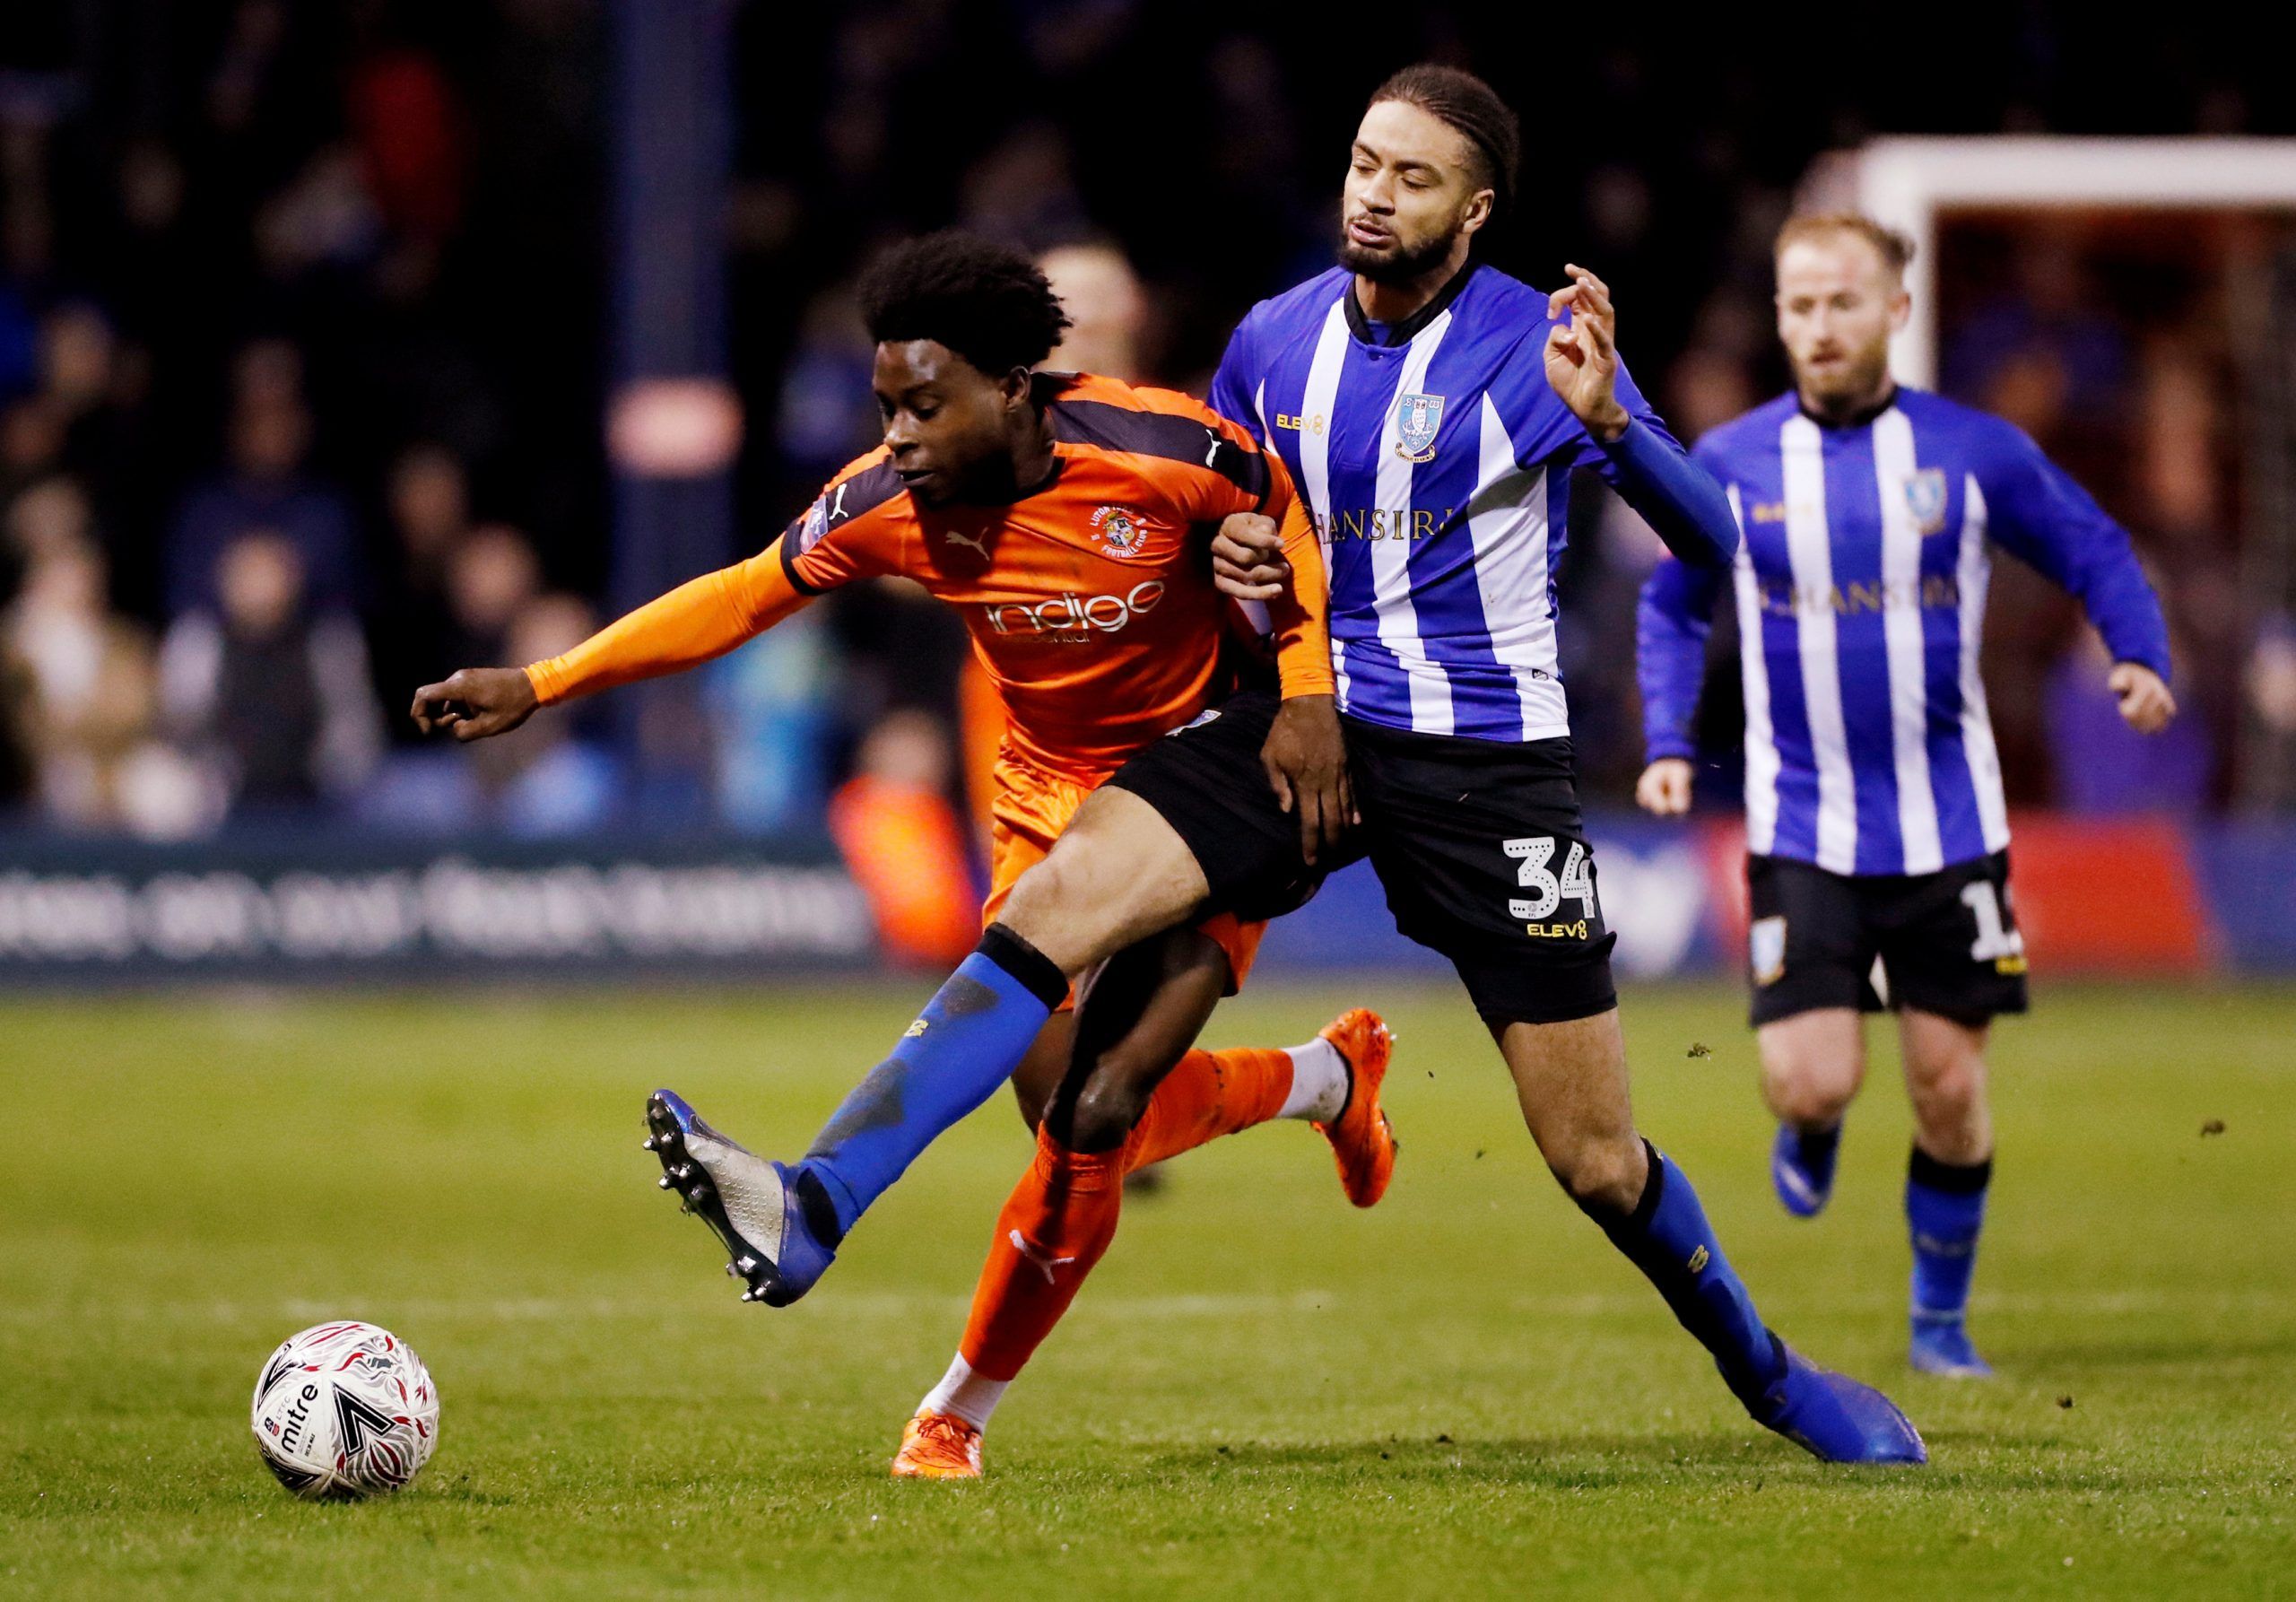 Soccer Football - FA Cup Third Round Replay - Luton Town v Sheffield Wednesday - Kenilworth Road, Luton, Britain - January 15, 2019   Luton Town's Pelly Ruddock in action with Sheffield Wednesday's Michael Hector    Action Images/Peter Cziborra